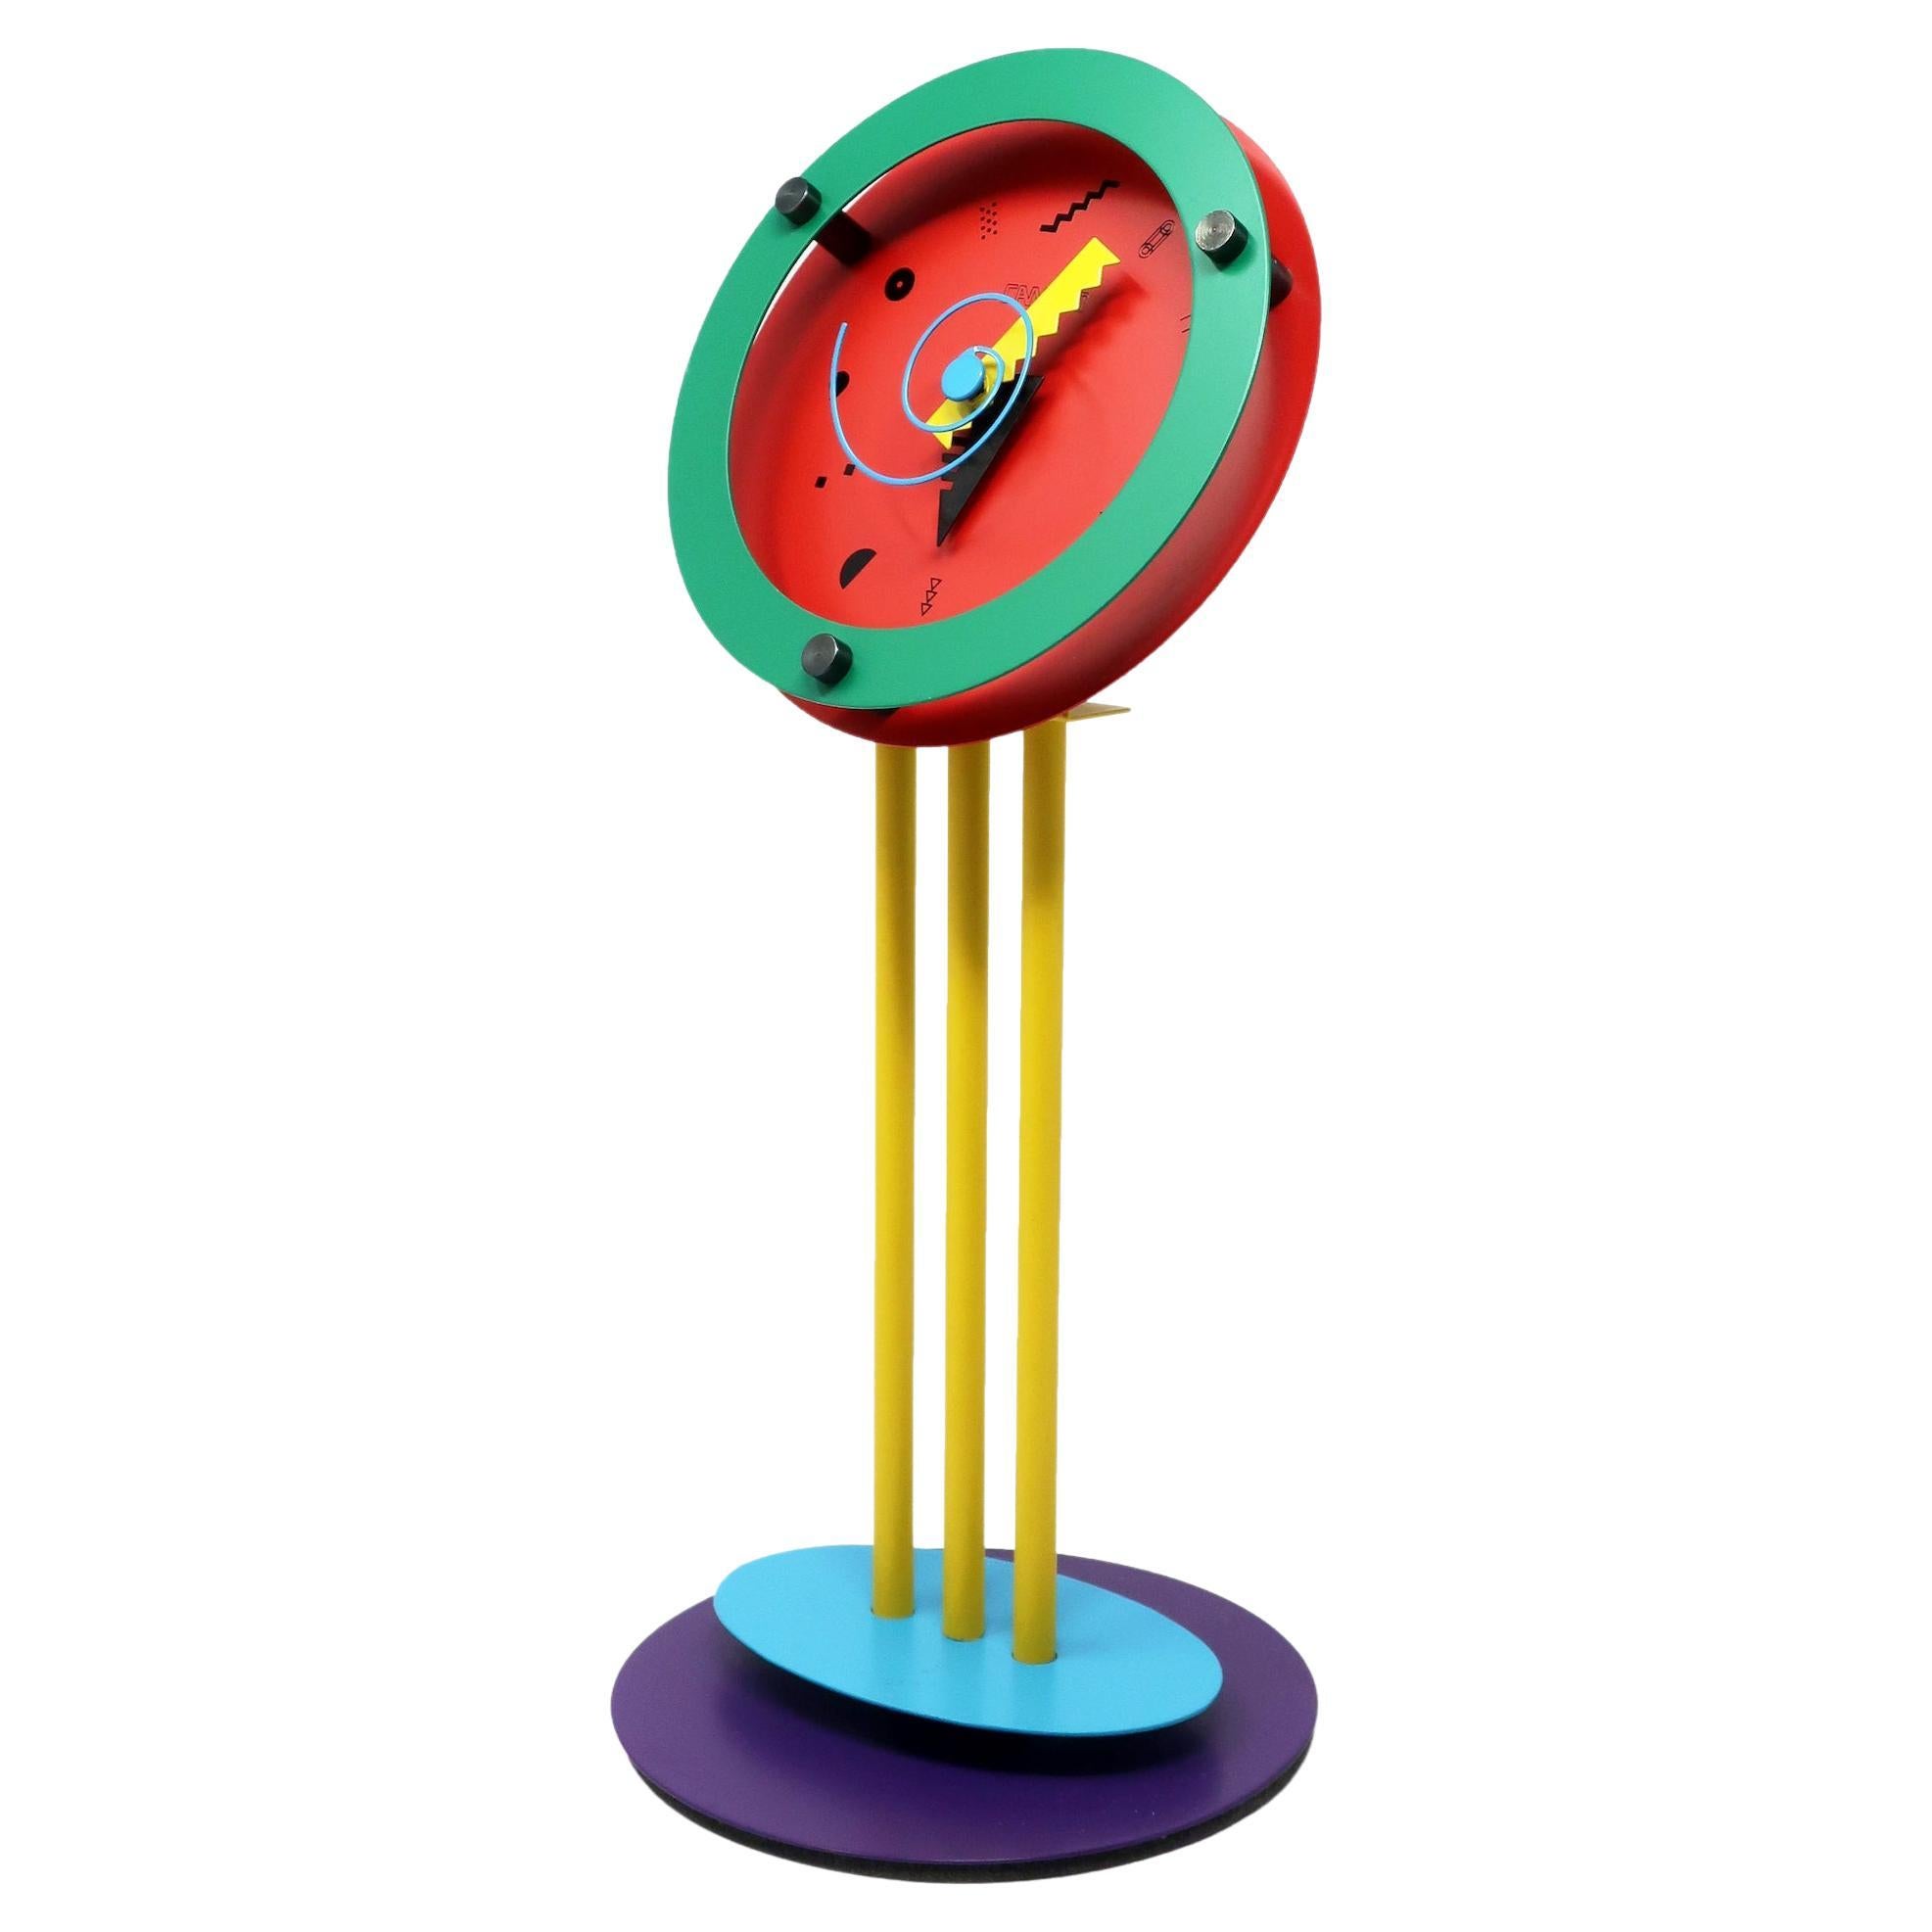 1980s Postmodern "Paradise" Table Clock by Shohei Mihara for Wakita and Canetti For Sale